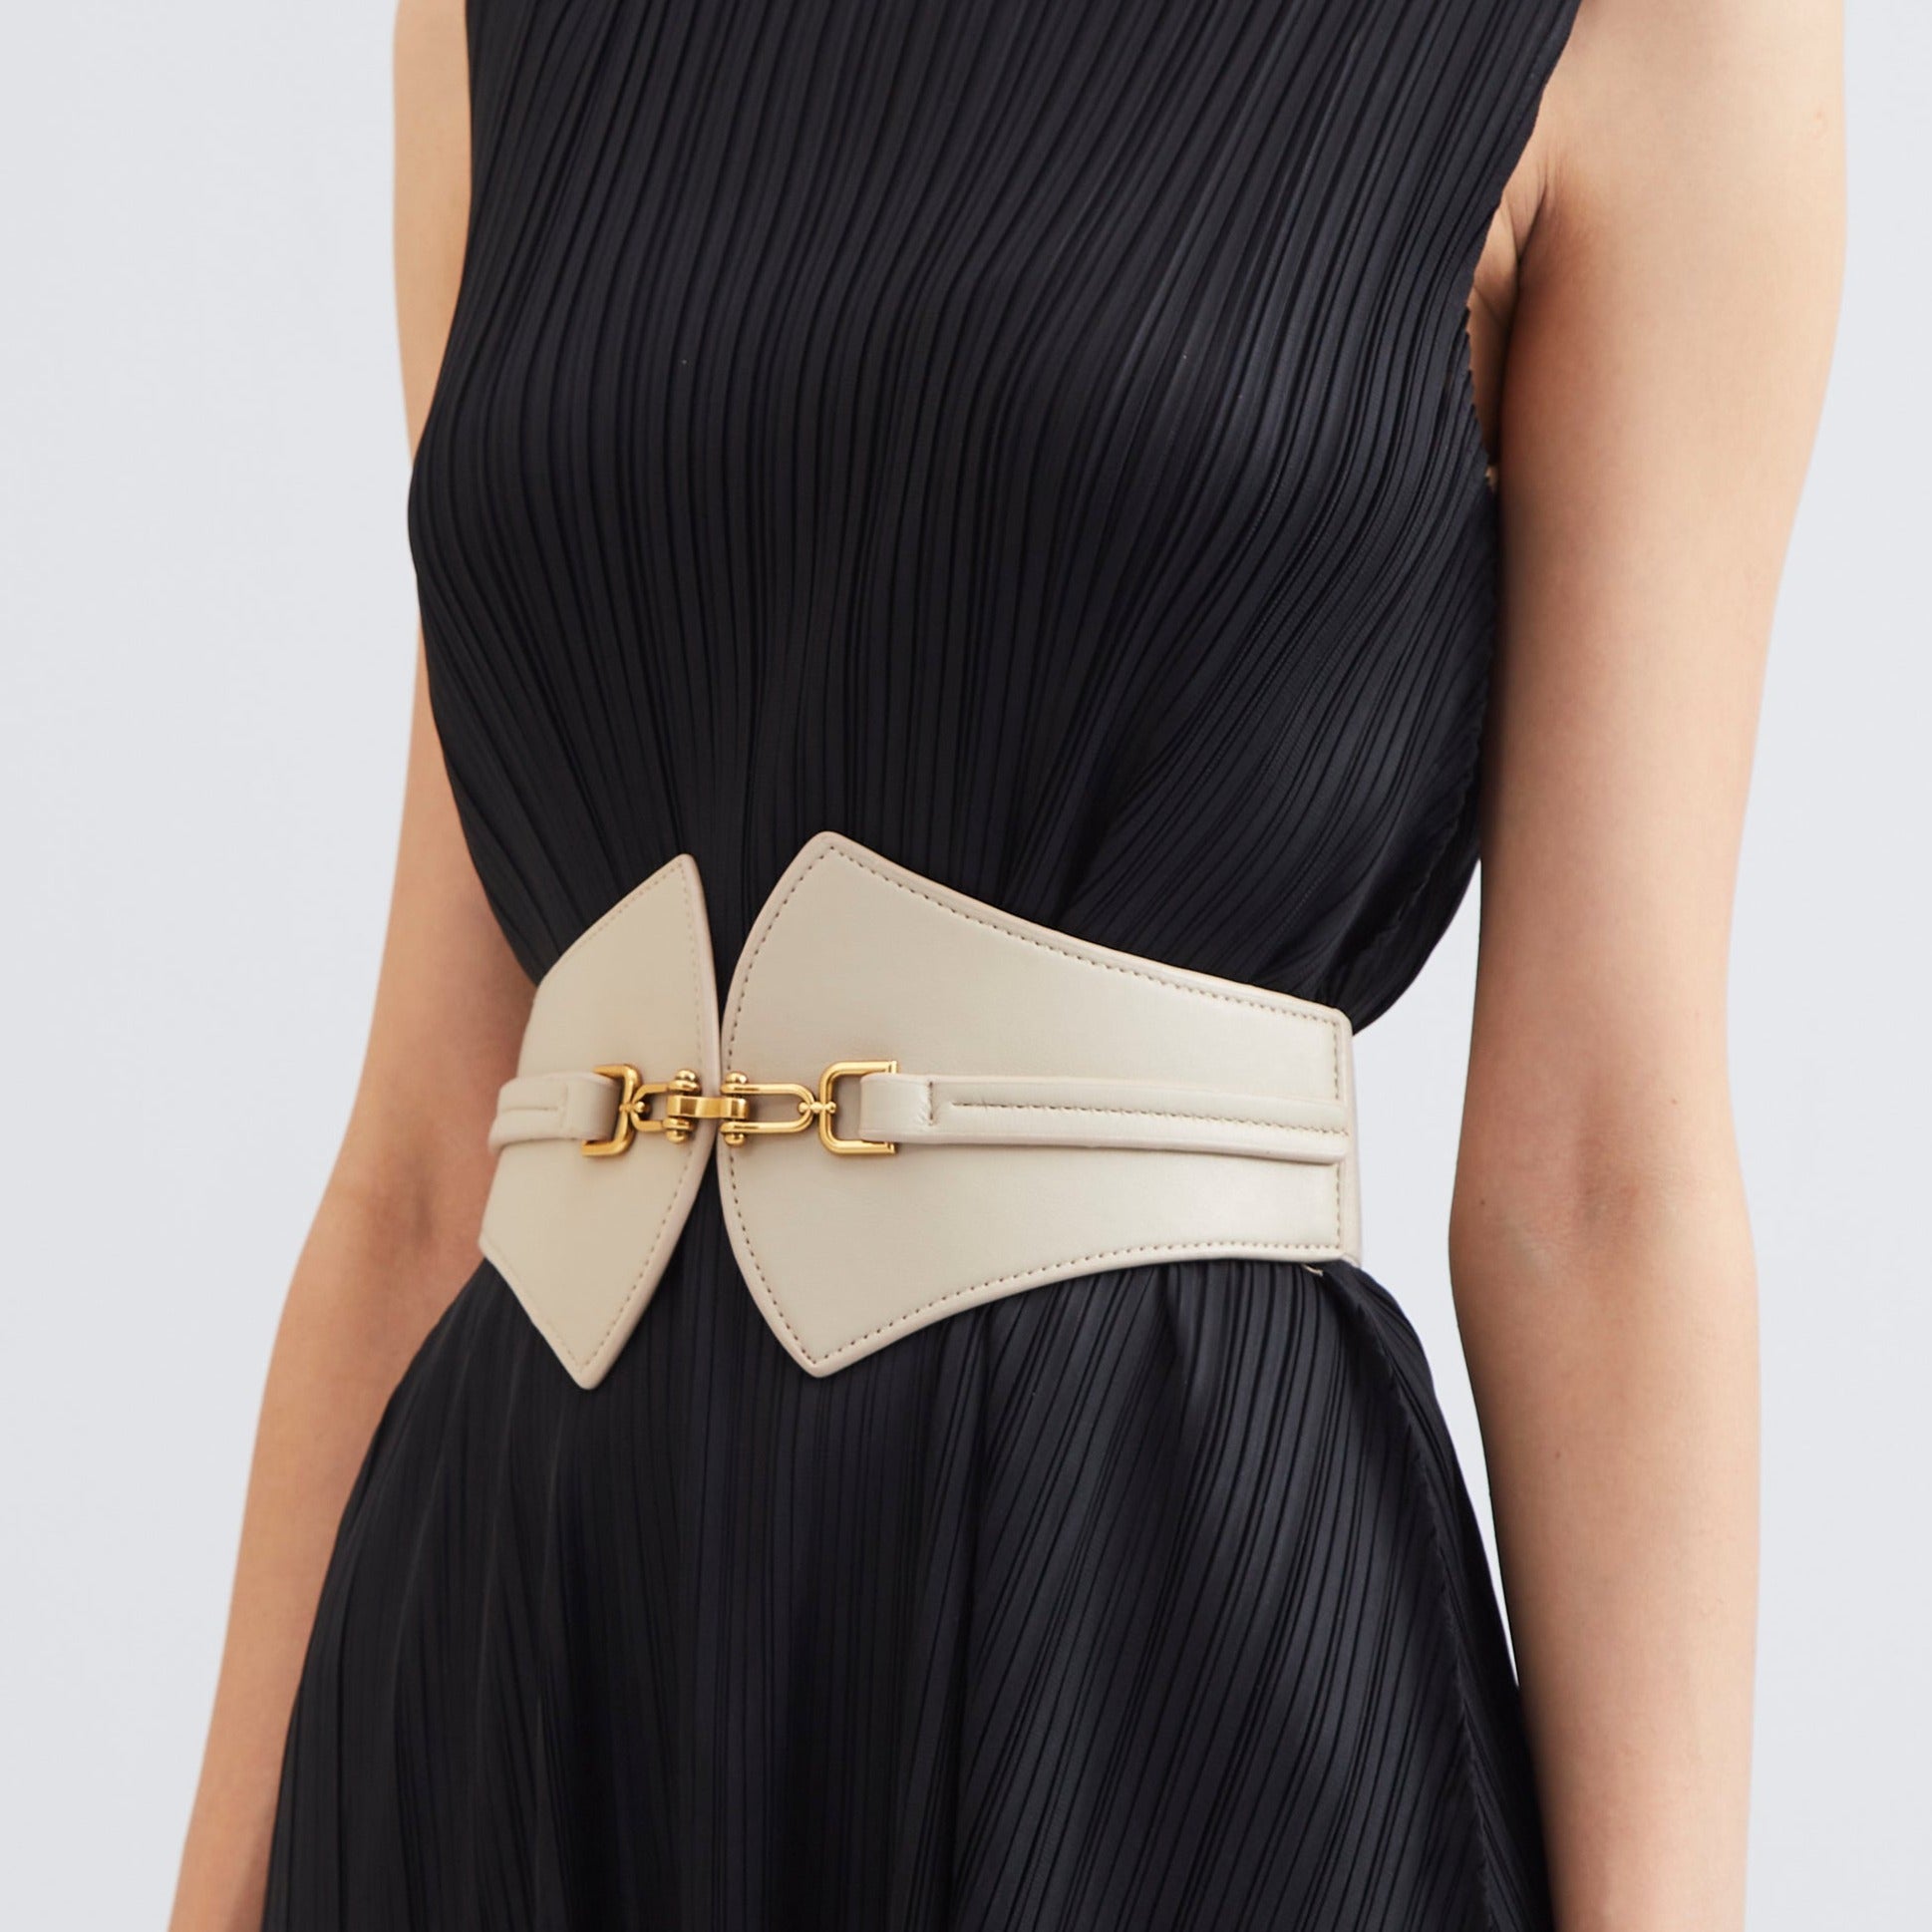 Dull Gold Clasp Buckle Belt - Nude